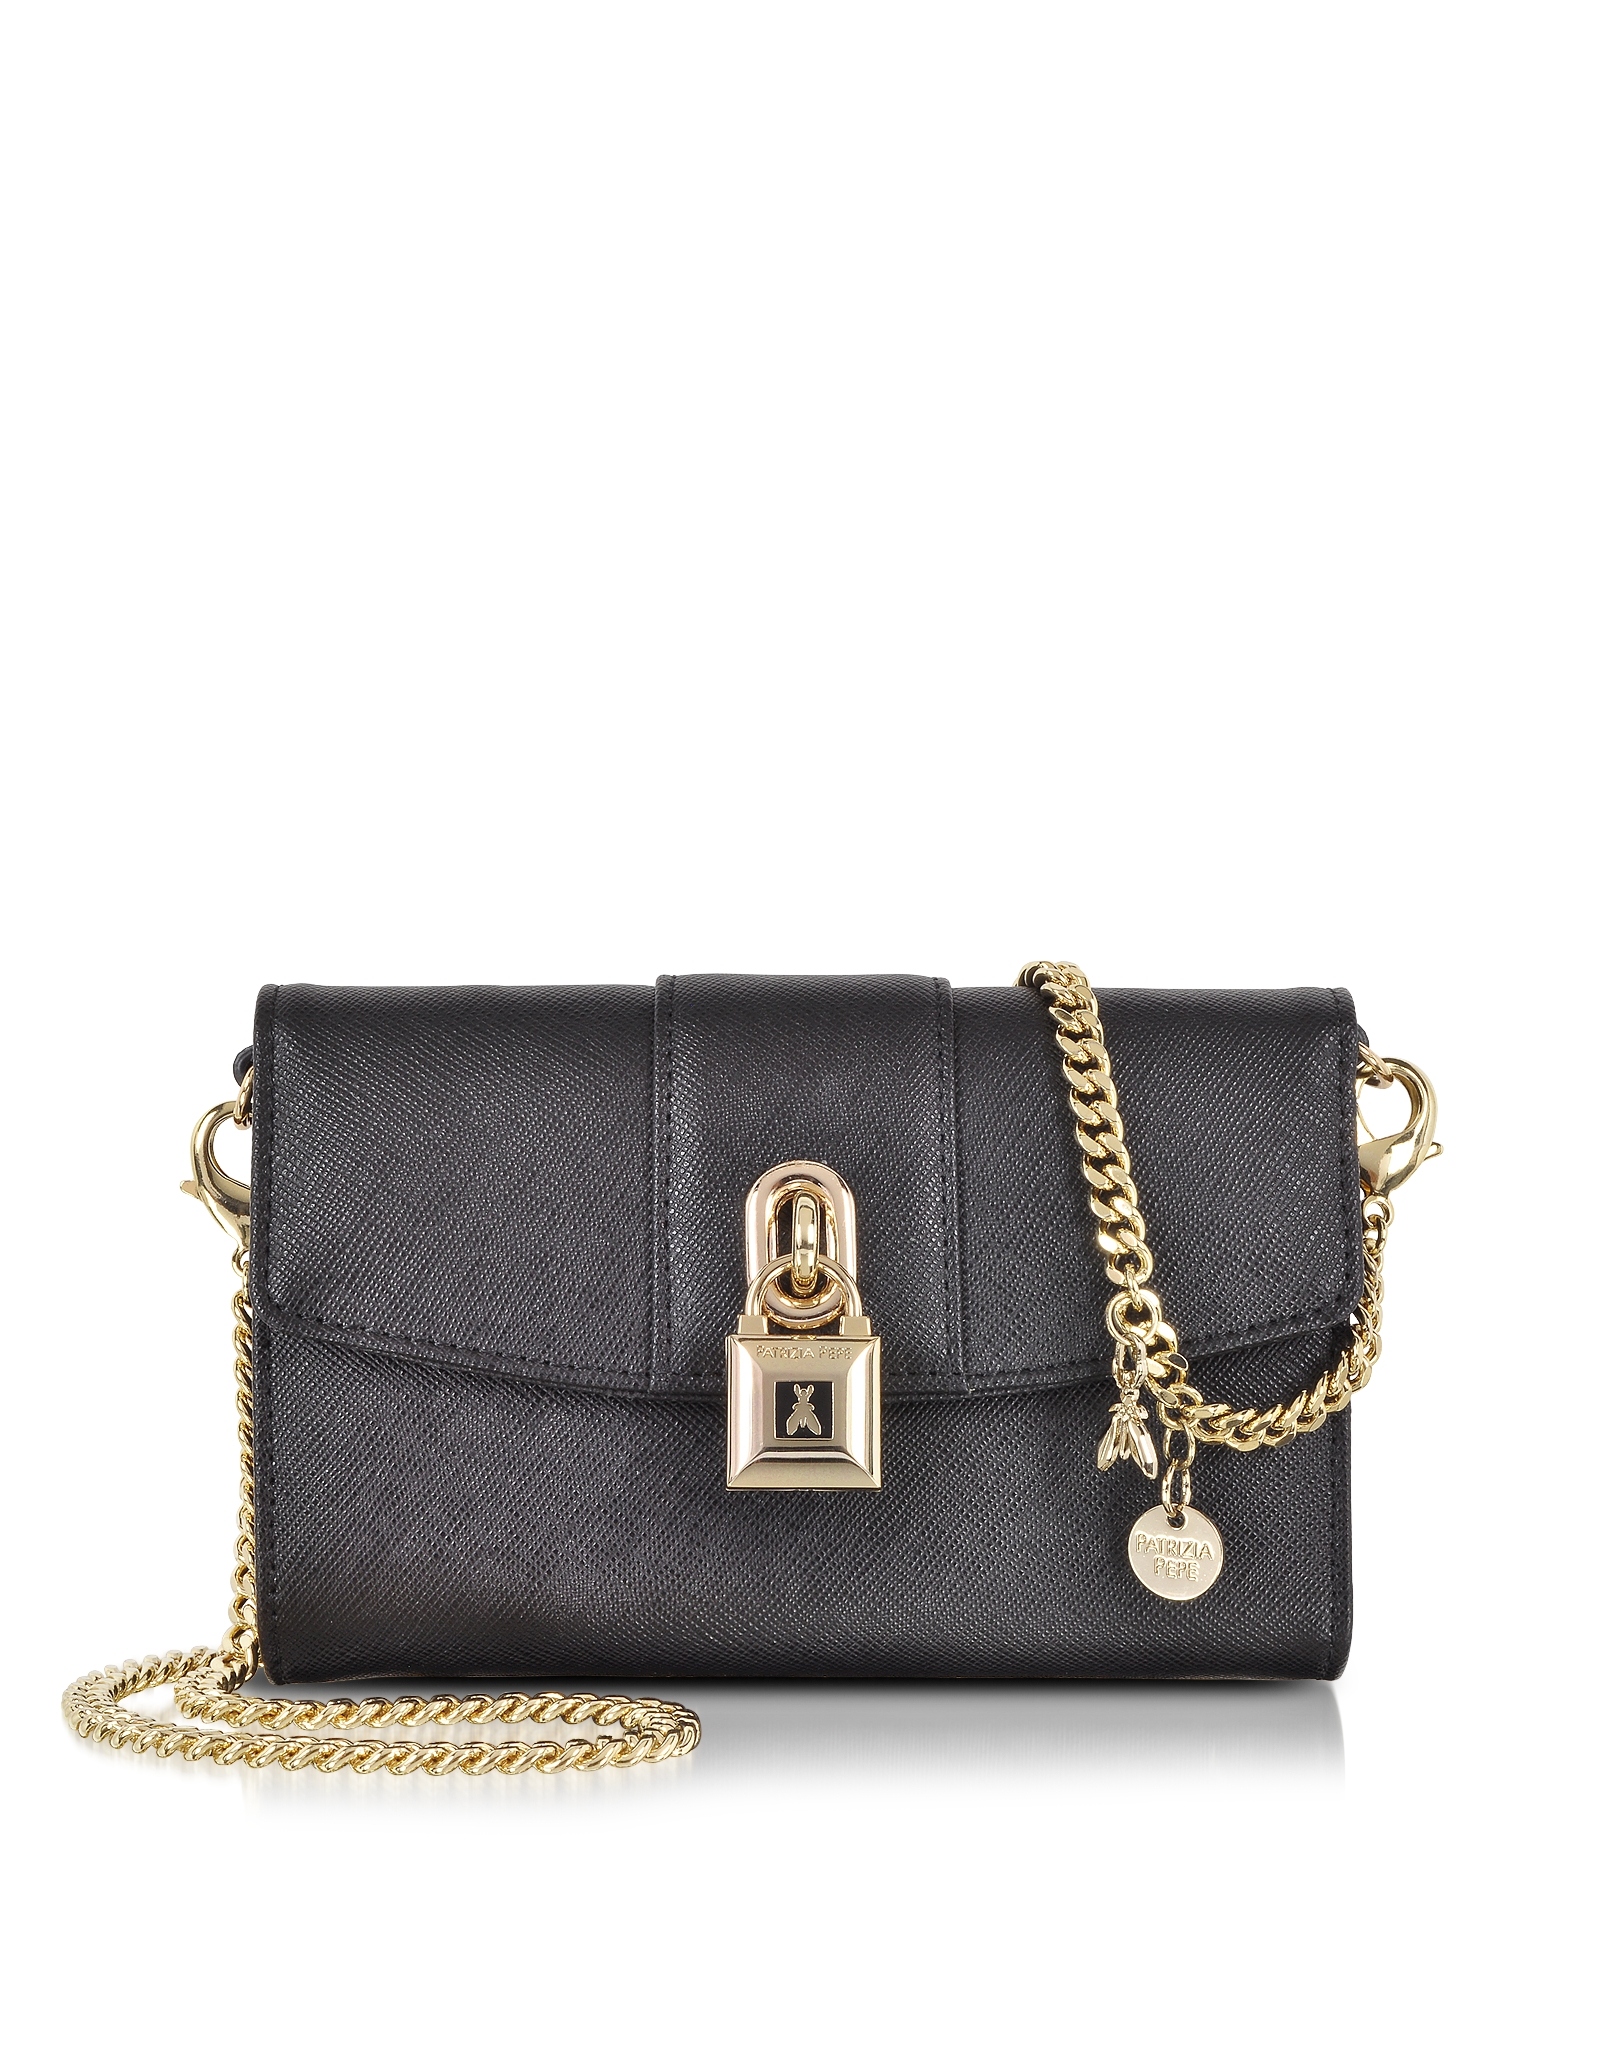 Patrizia Pepe Mini Clutch Bag In Leather With Shoulder Strap in Gold (Black) - Lyst